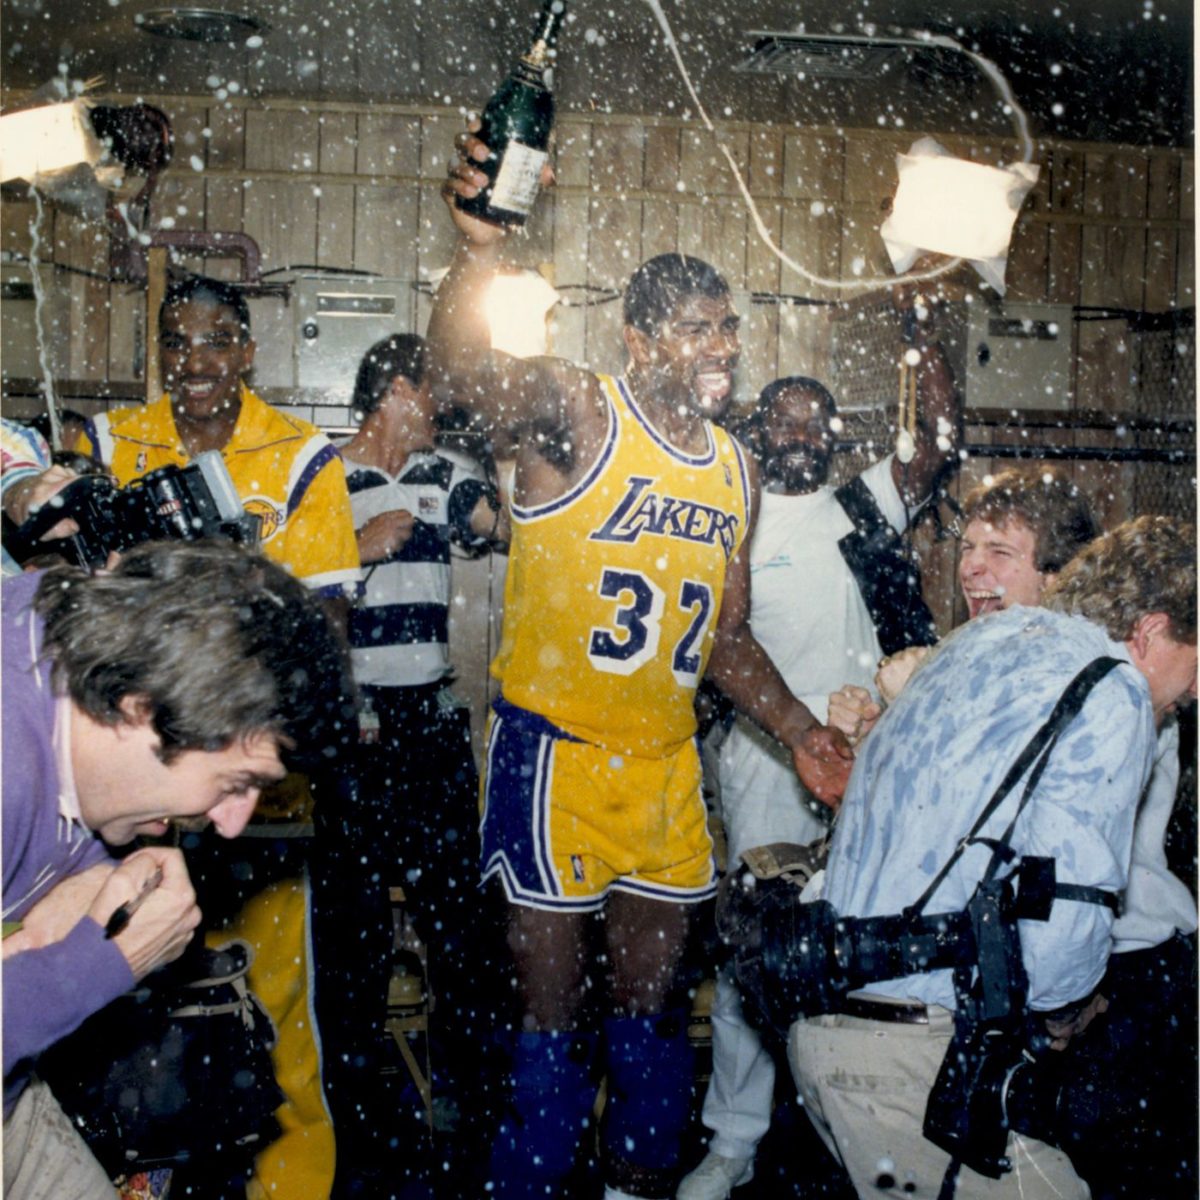 HBO's Super Bowl commercial hypes new series on 1980s Lakers